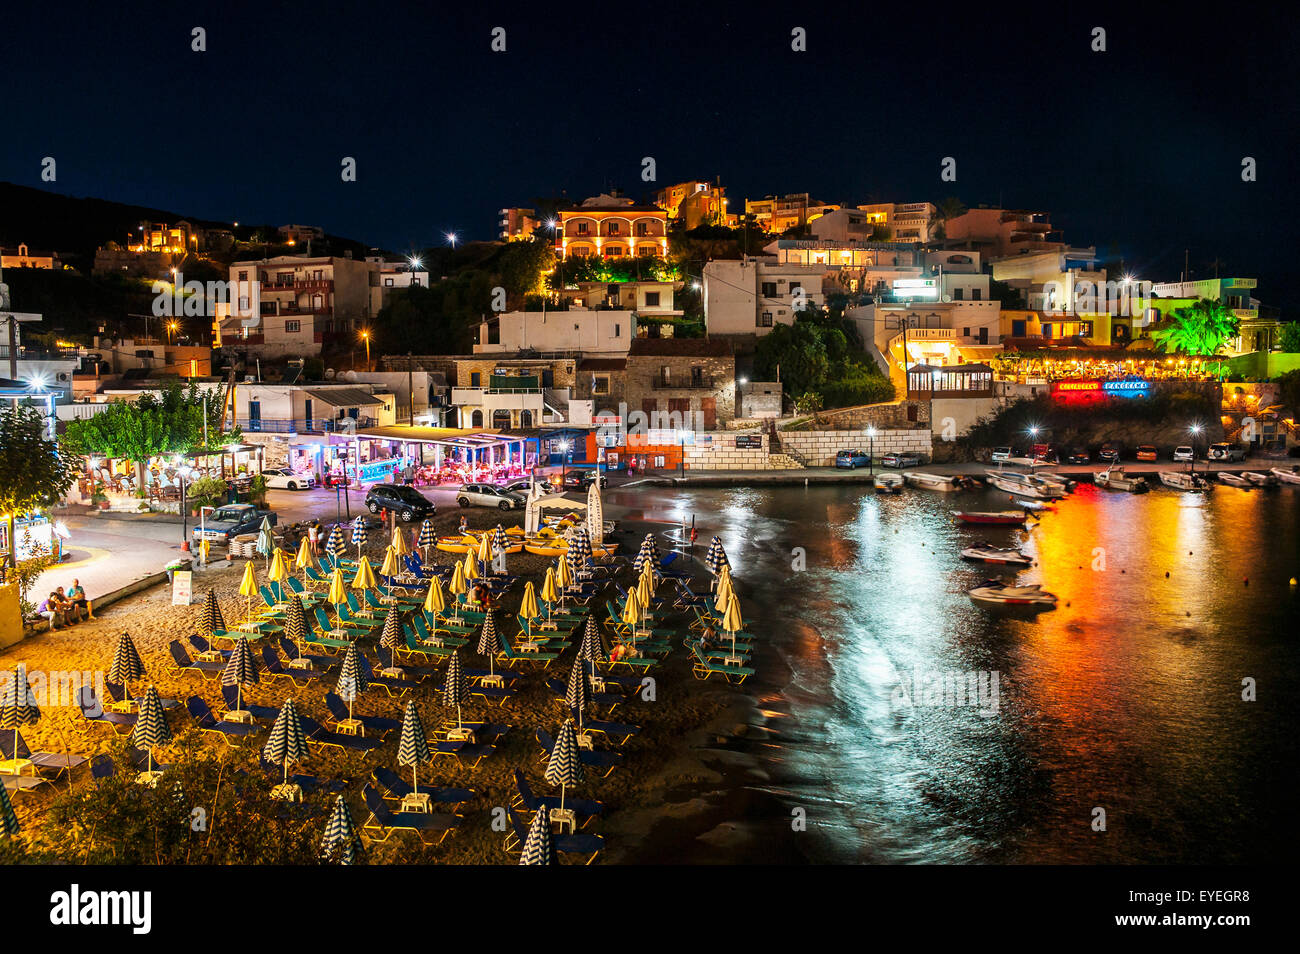 Colourful lights illuminate and reflect on the water in the harbour; Bali, Crete, Greece Stock Photo